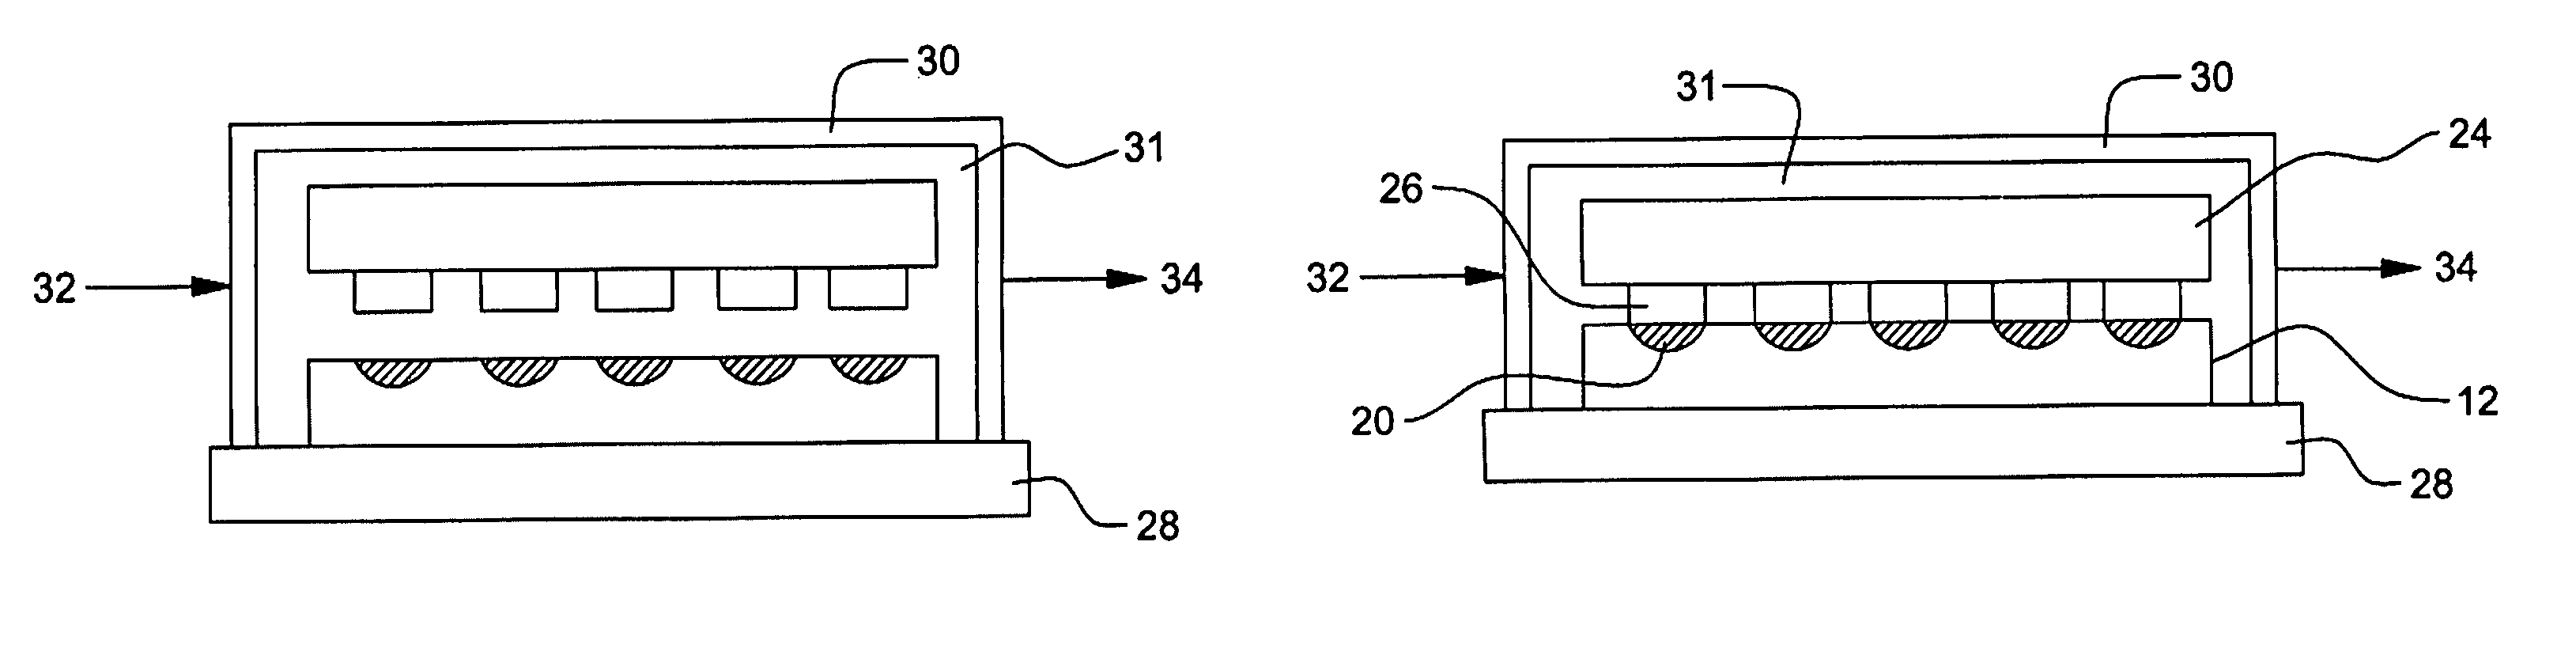 Process for making interconnect solder Pb-free bumps free from organo-tin/tin deposits on the wafer surface